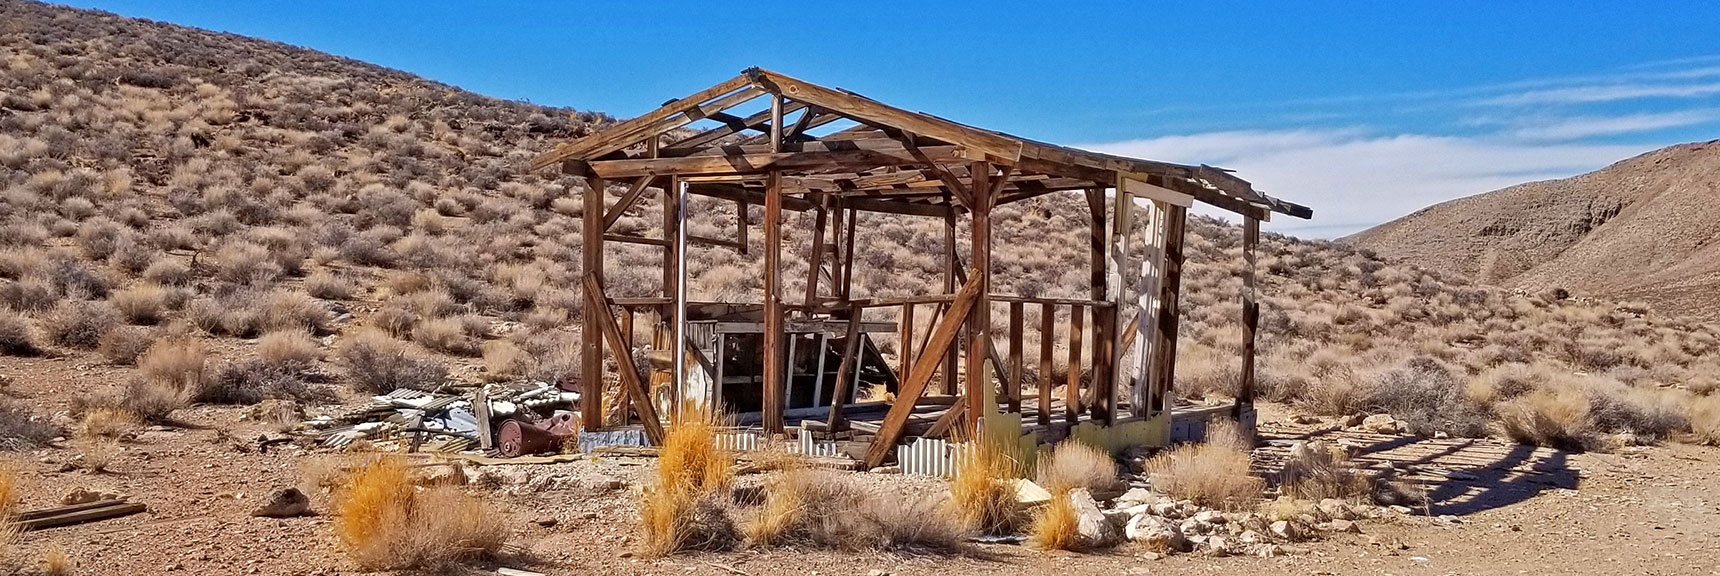 Old Mining Cabin, Possibly from the 1940s to 1950? Off the Skidoo Road. | Skidoo Stamp Mill, Panamint Mountains, Death Valley National Park, CA